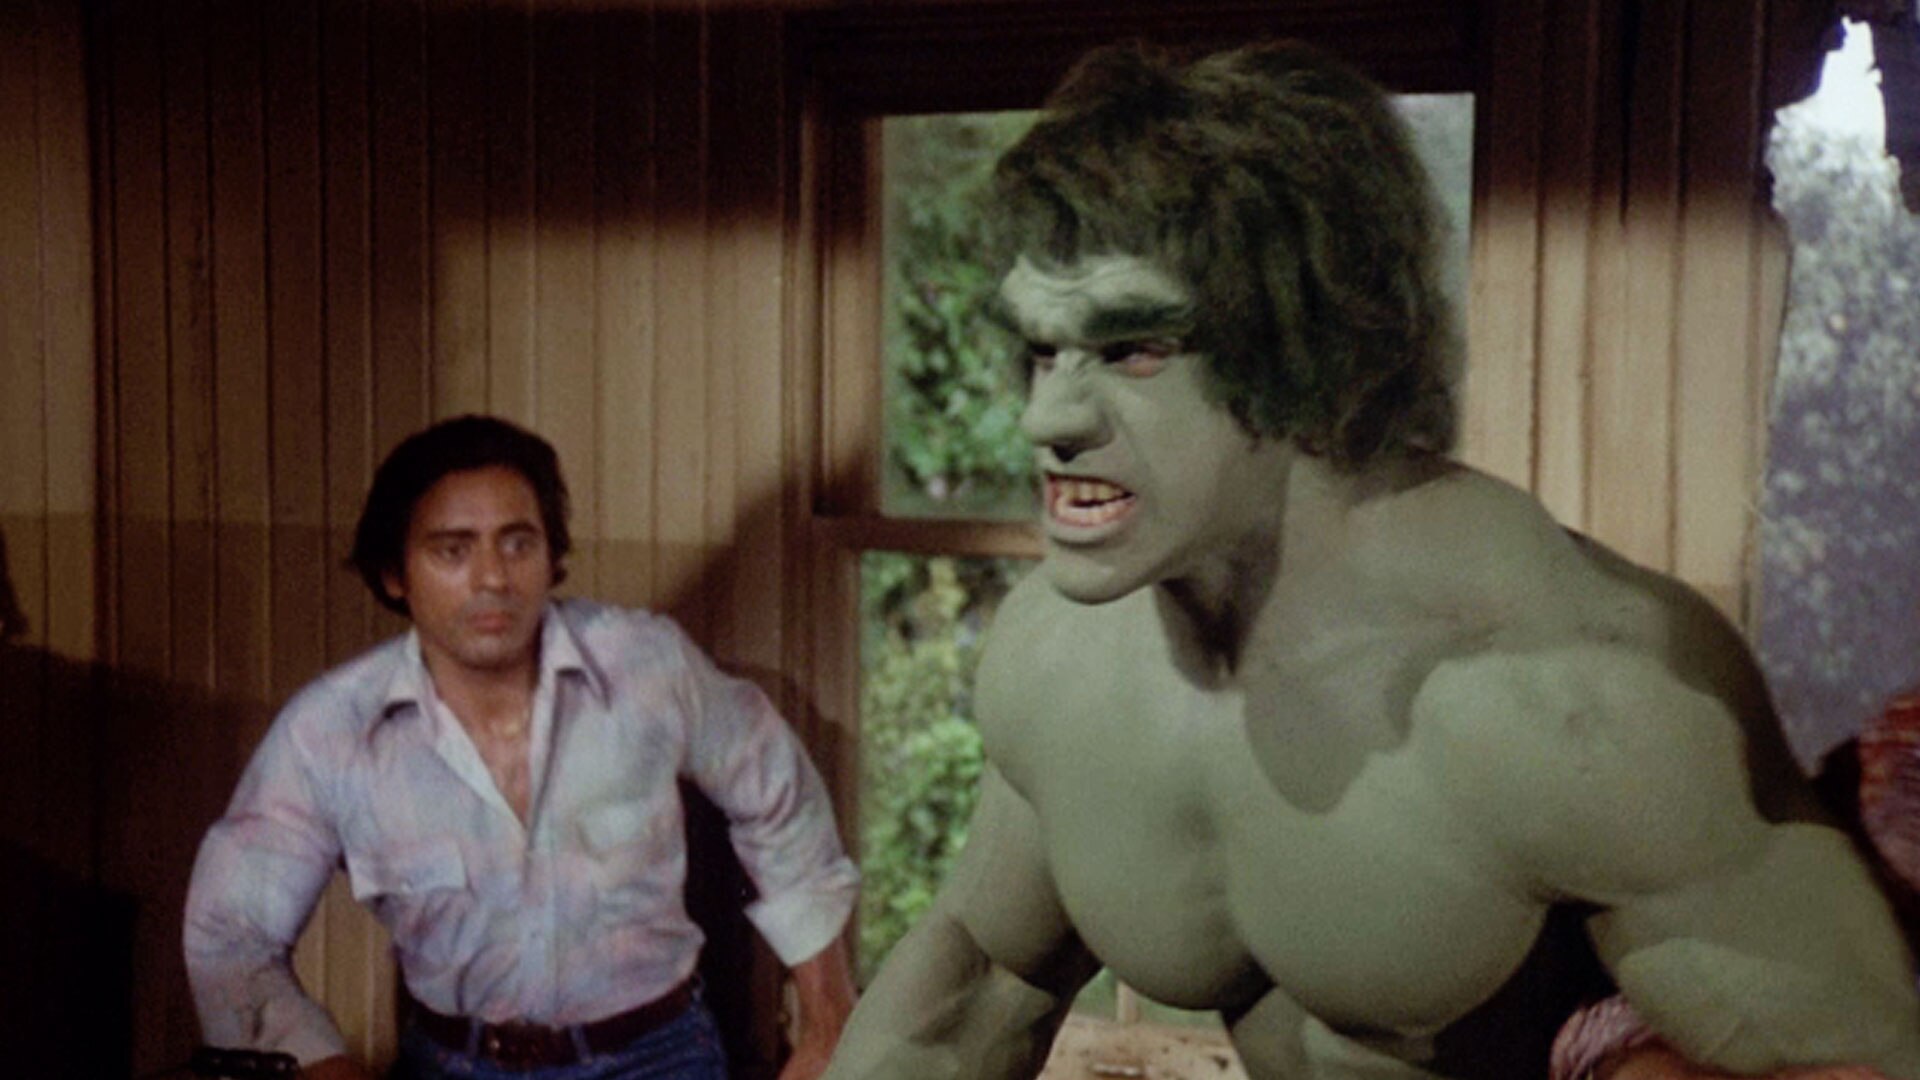 The Incredible Hulk Nbc Com Other articles where bill bixby is discussed: t...